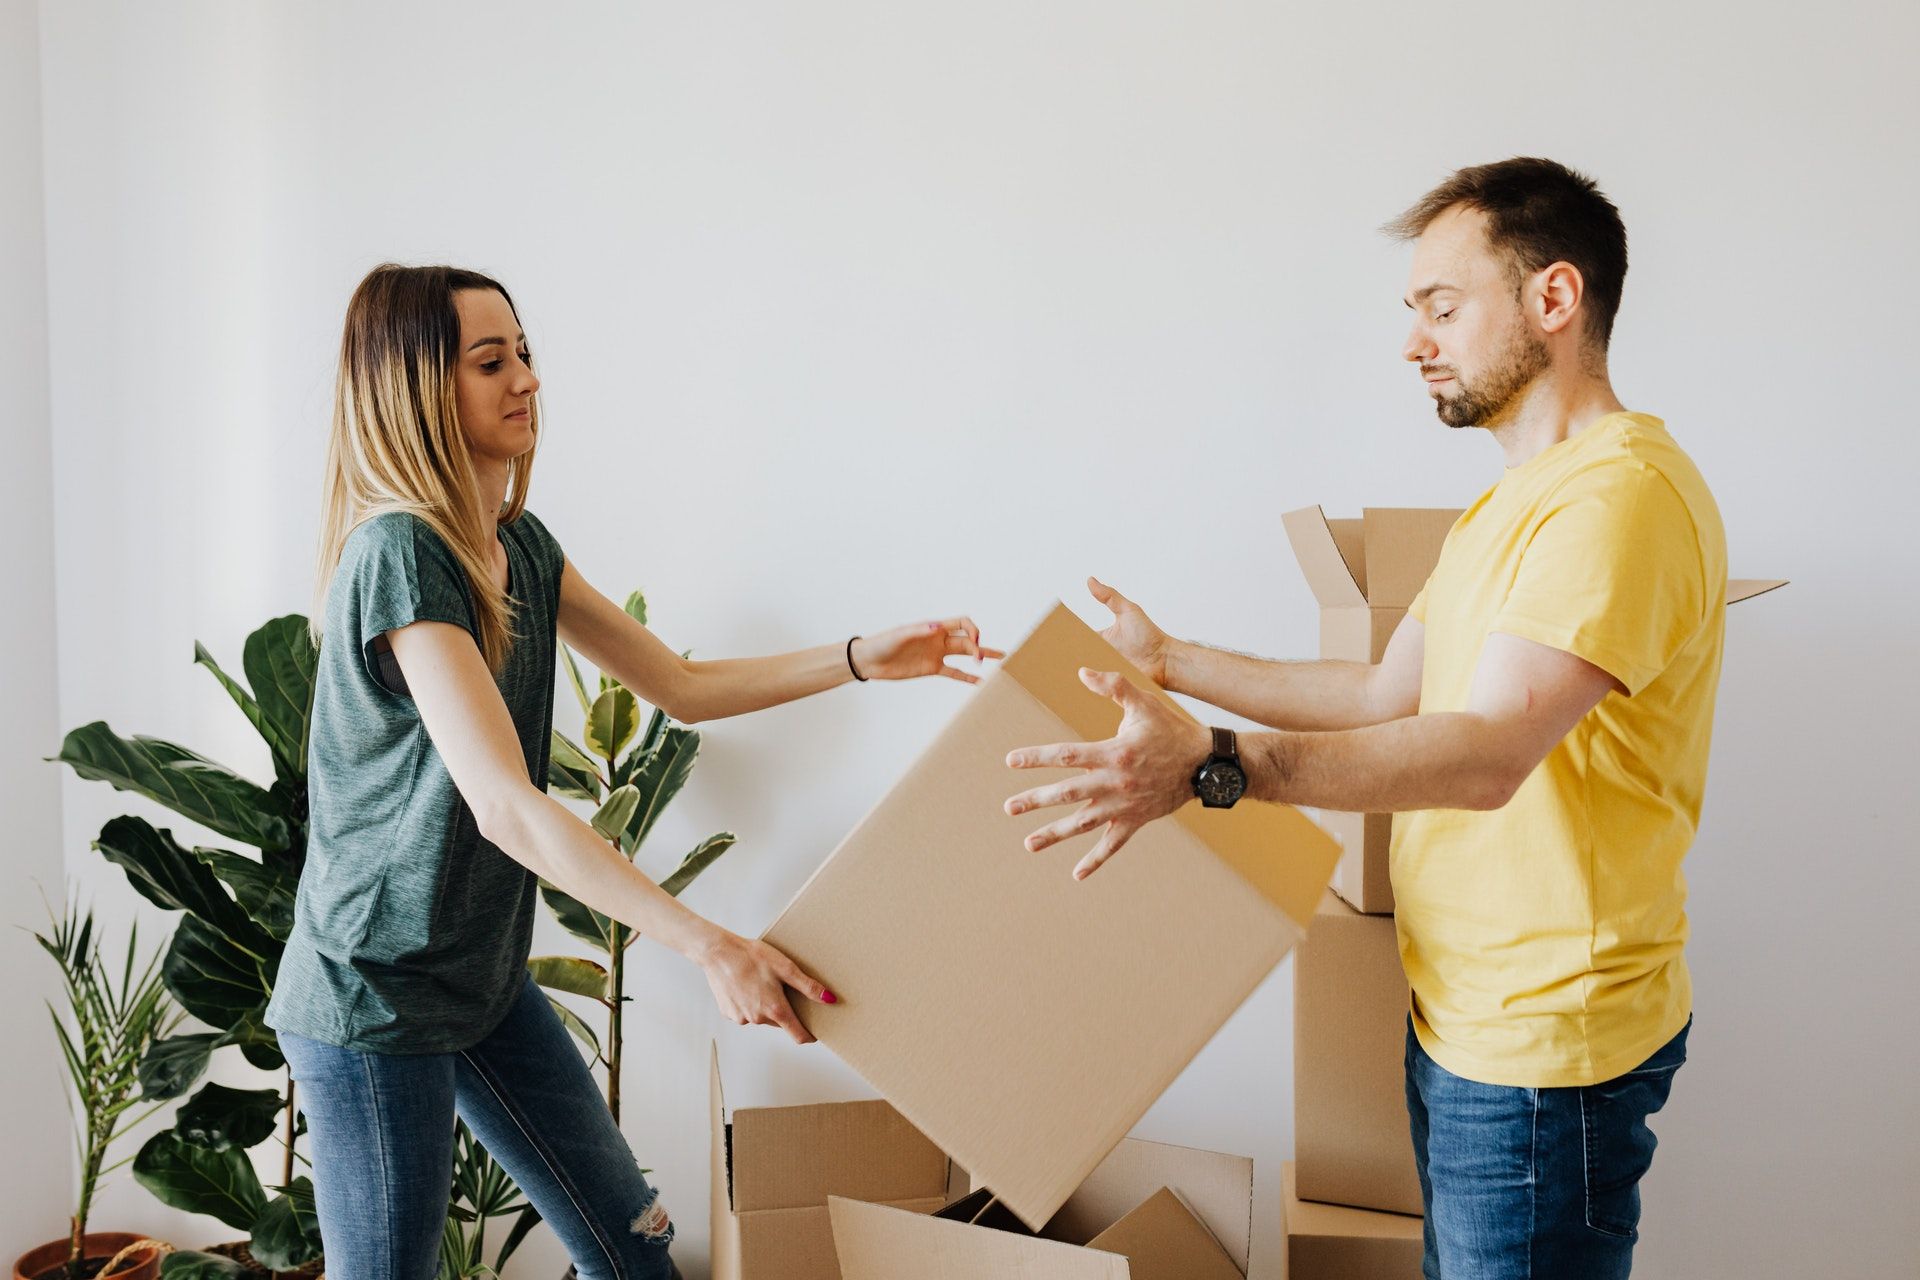                               7 Serious DIY Mistakes When Moving By Yourself                             
                              